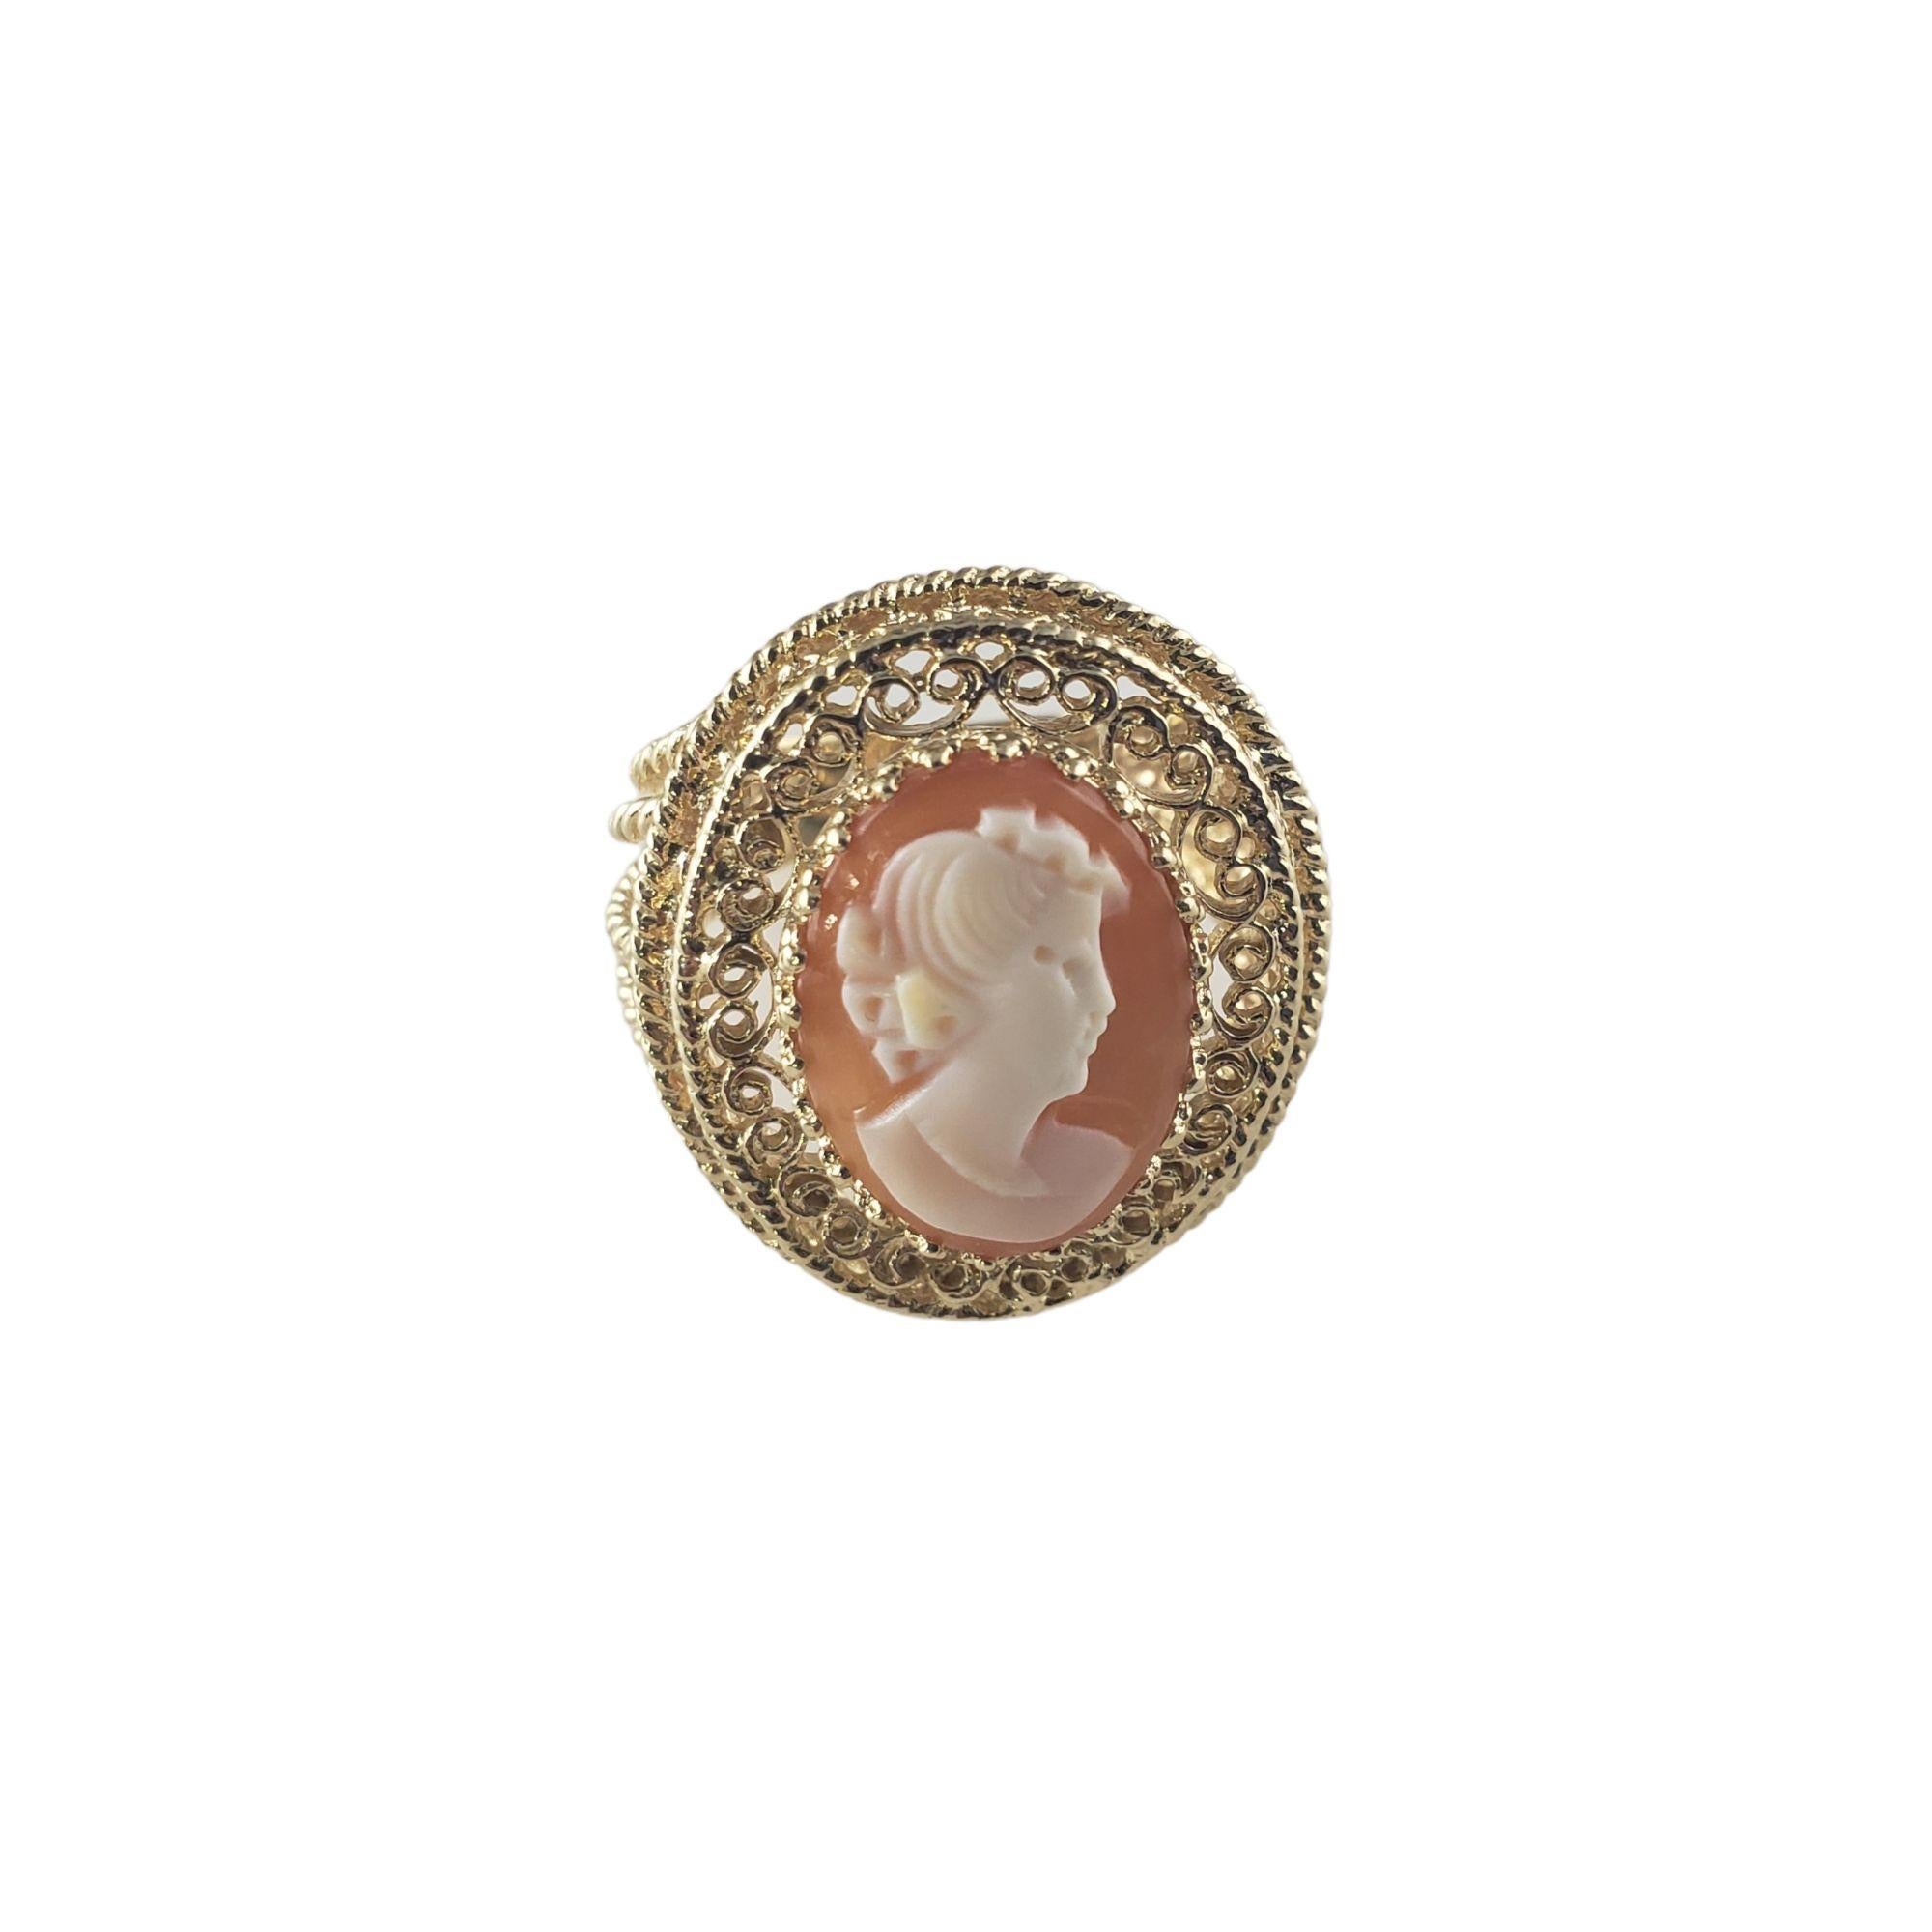 This elegant cameo ring features a lovely lady in profile set in beautifully detailed 10K yellow gold. Top of ring measures 25 mm x 22 mm.

Shank: 4 mm.

Tested 10K gold. 

Ring Size:  9

Very good condition, professionally polished.

Will come